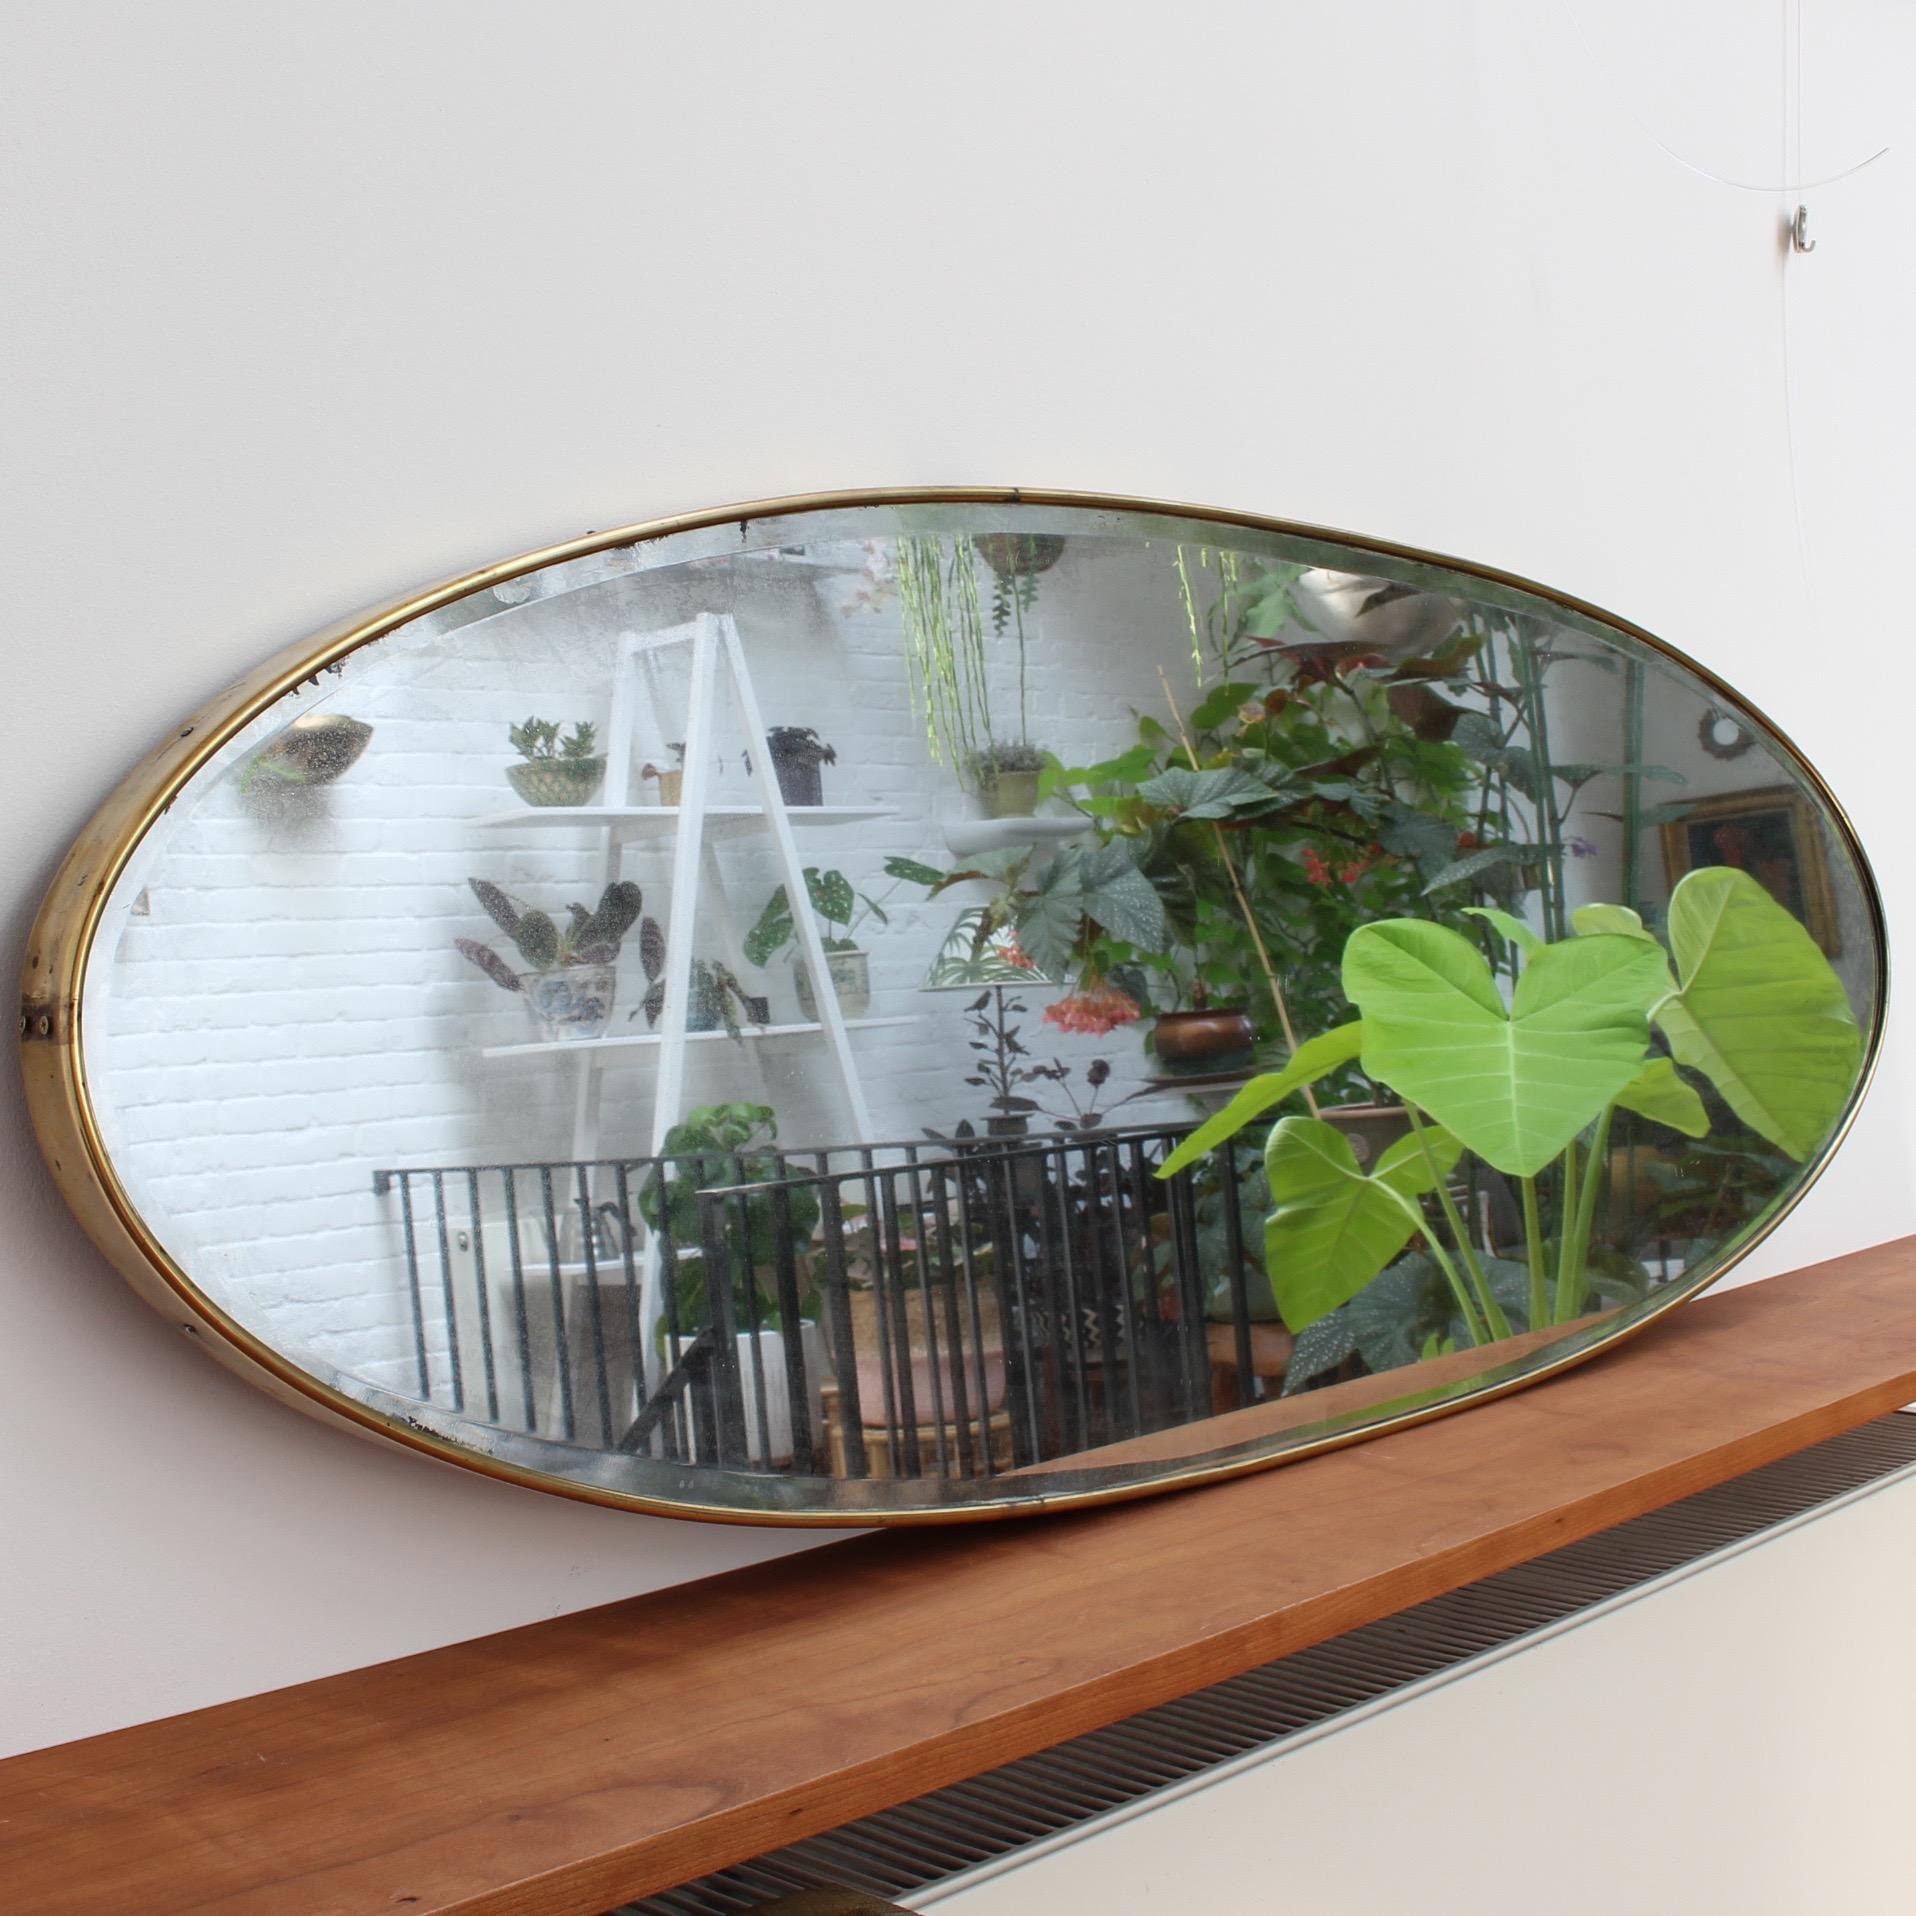 Oblong Italian wall mirror with brass frame, circa 1950s. The mirror is beautifully oblong-shaped with classic detailing. Always elegant and distinctive in a modern Gio Ponti style. Configured for a horizontal hanging but may be modified to be hung